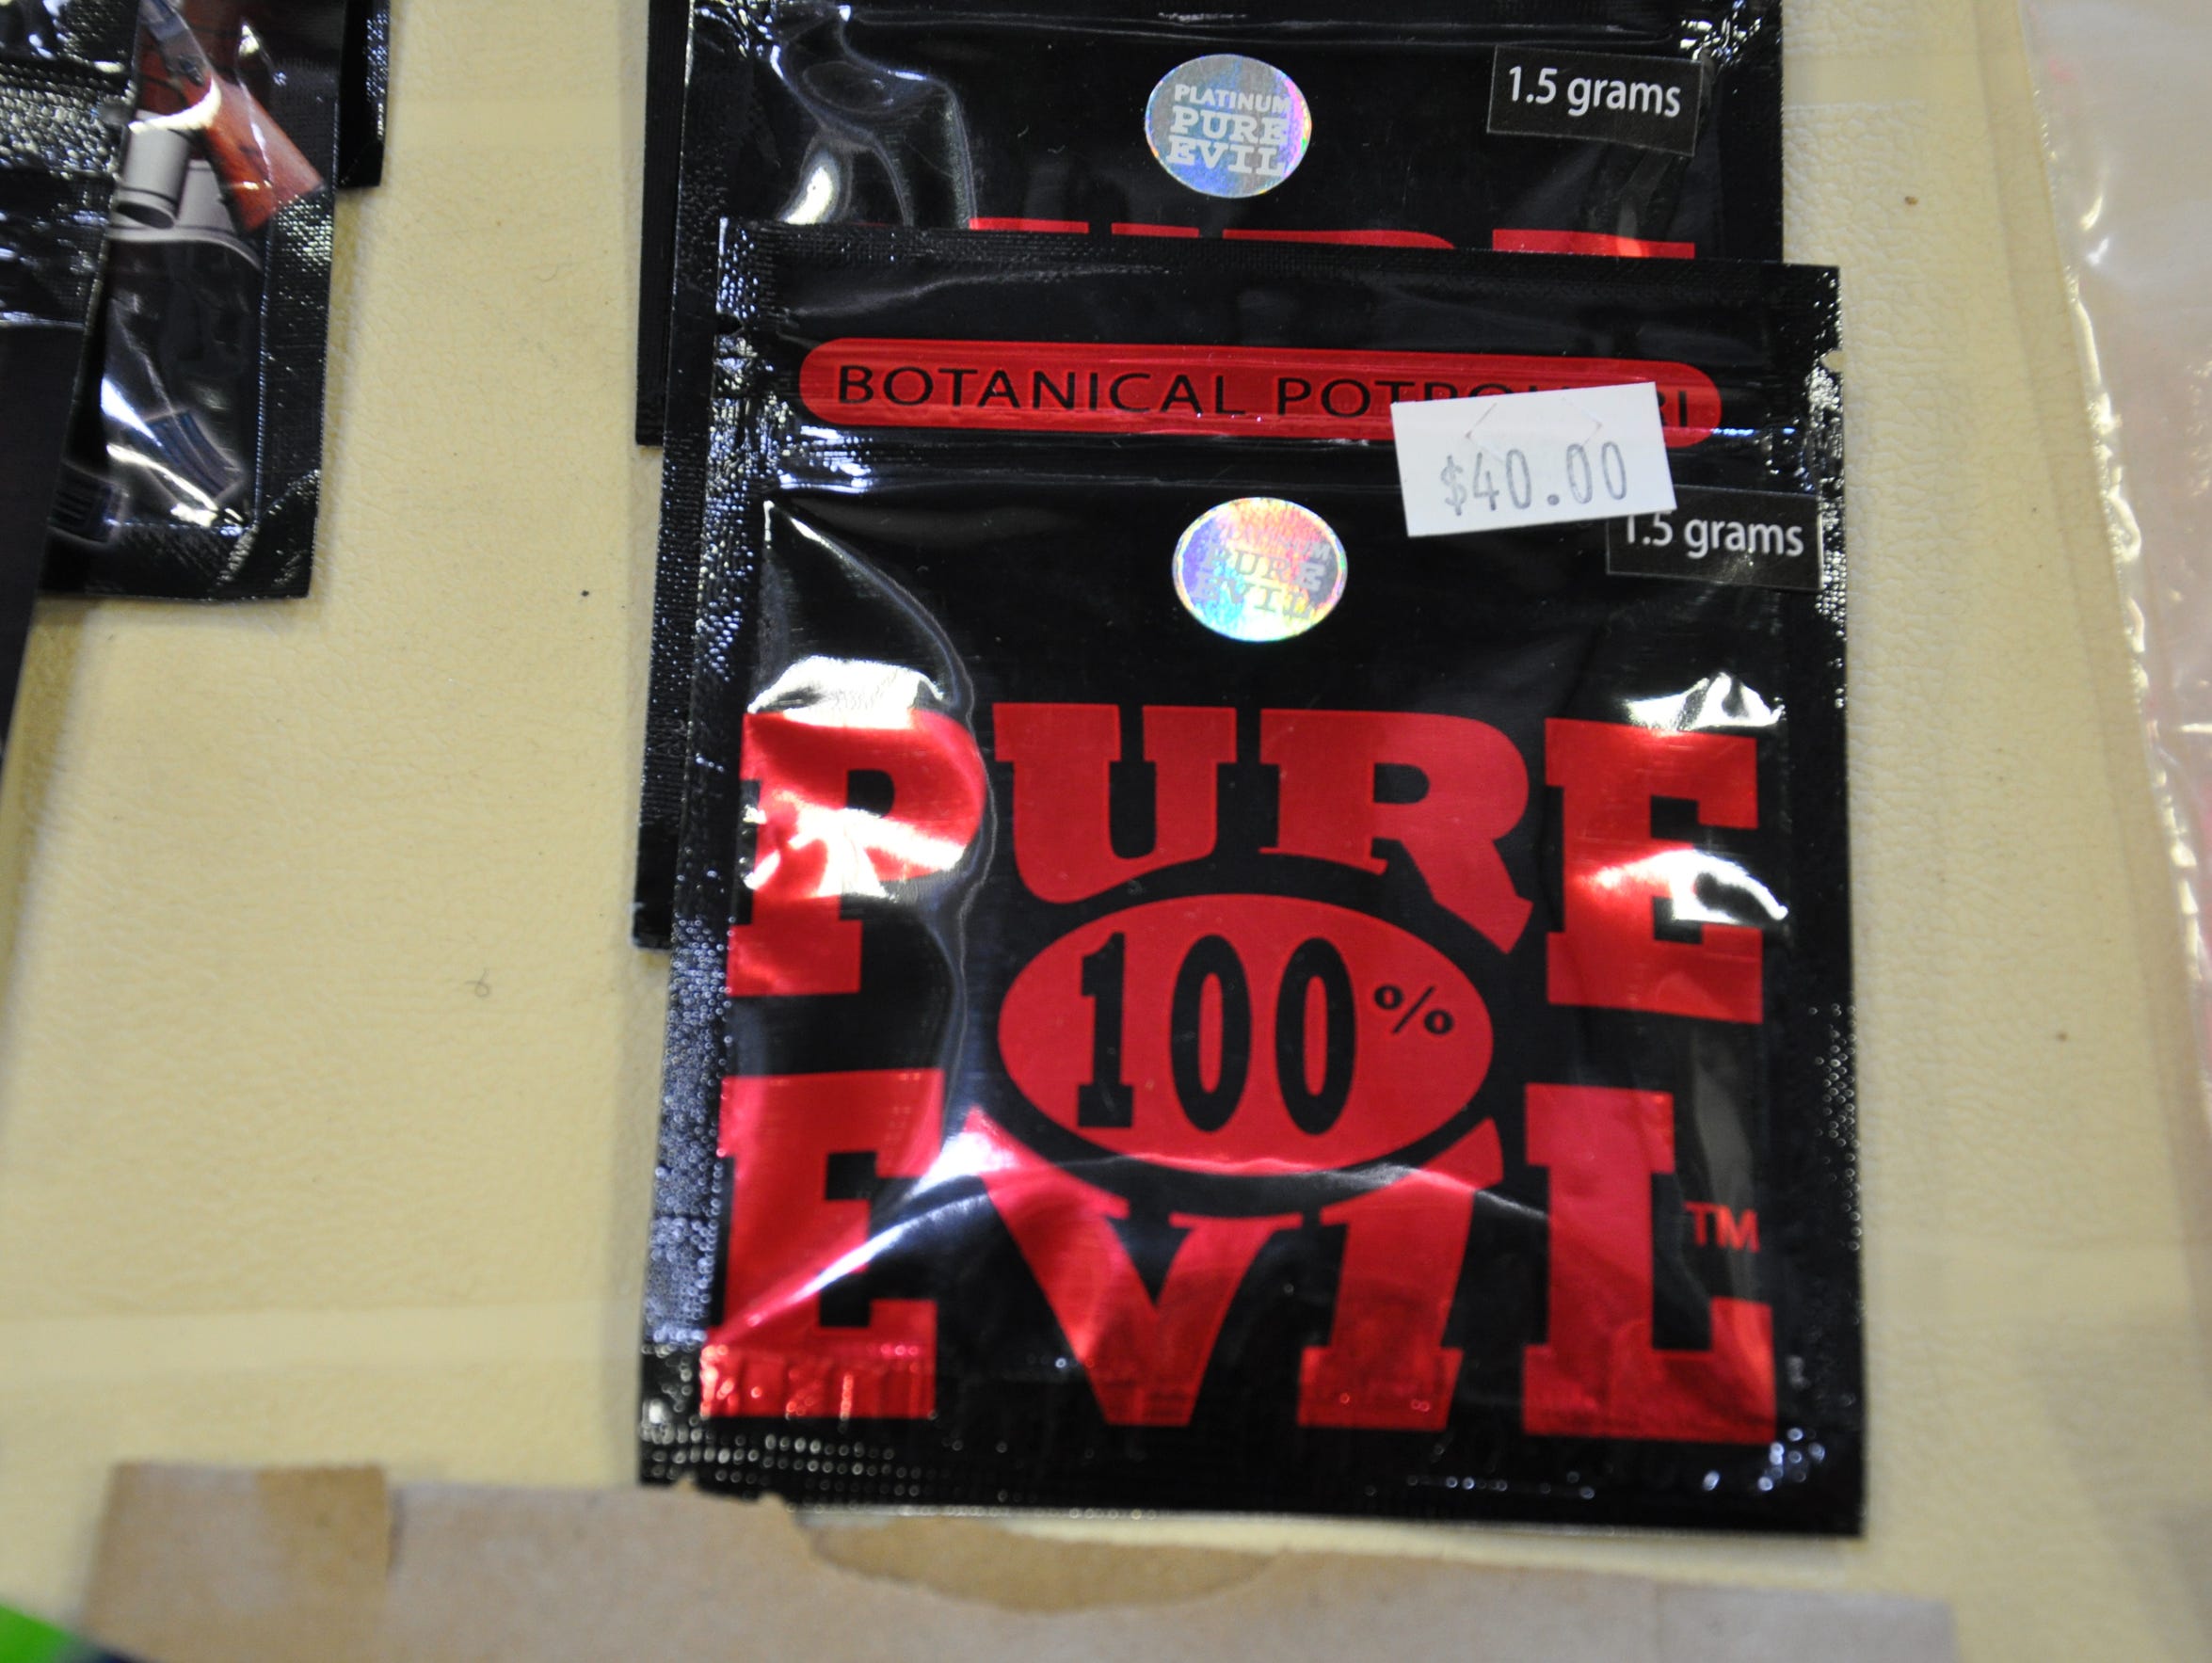 Packets advertising Pure Evil contain the drug spice.